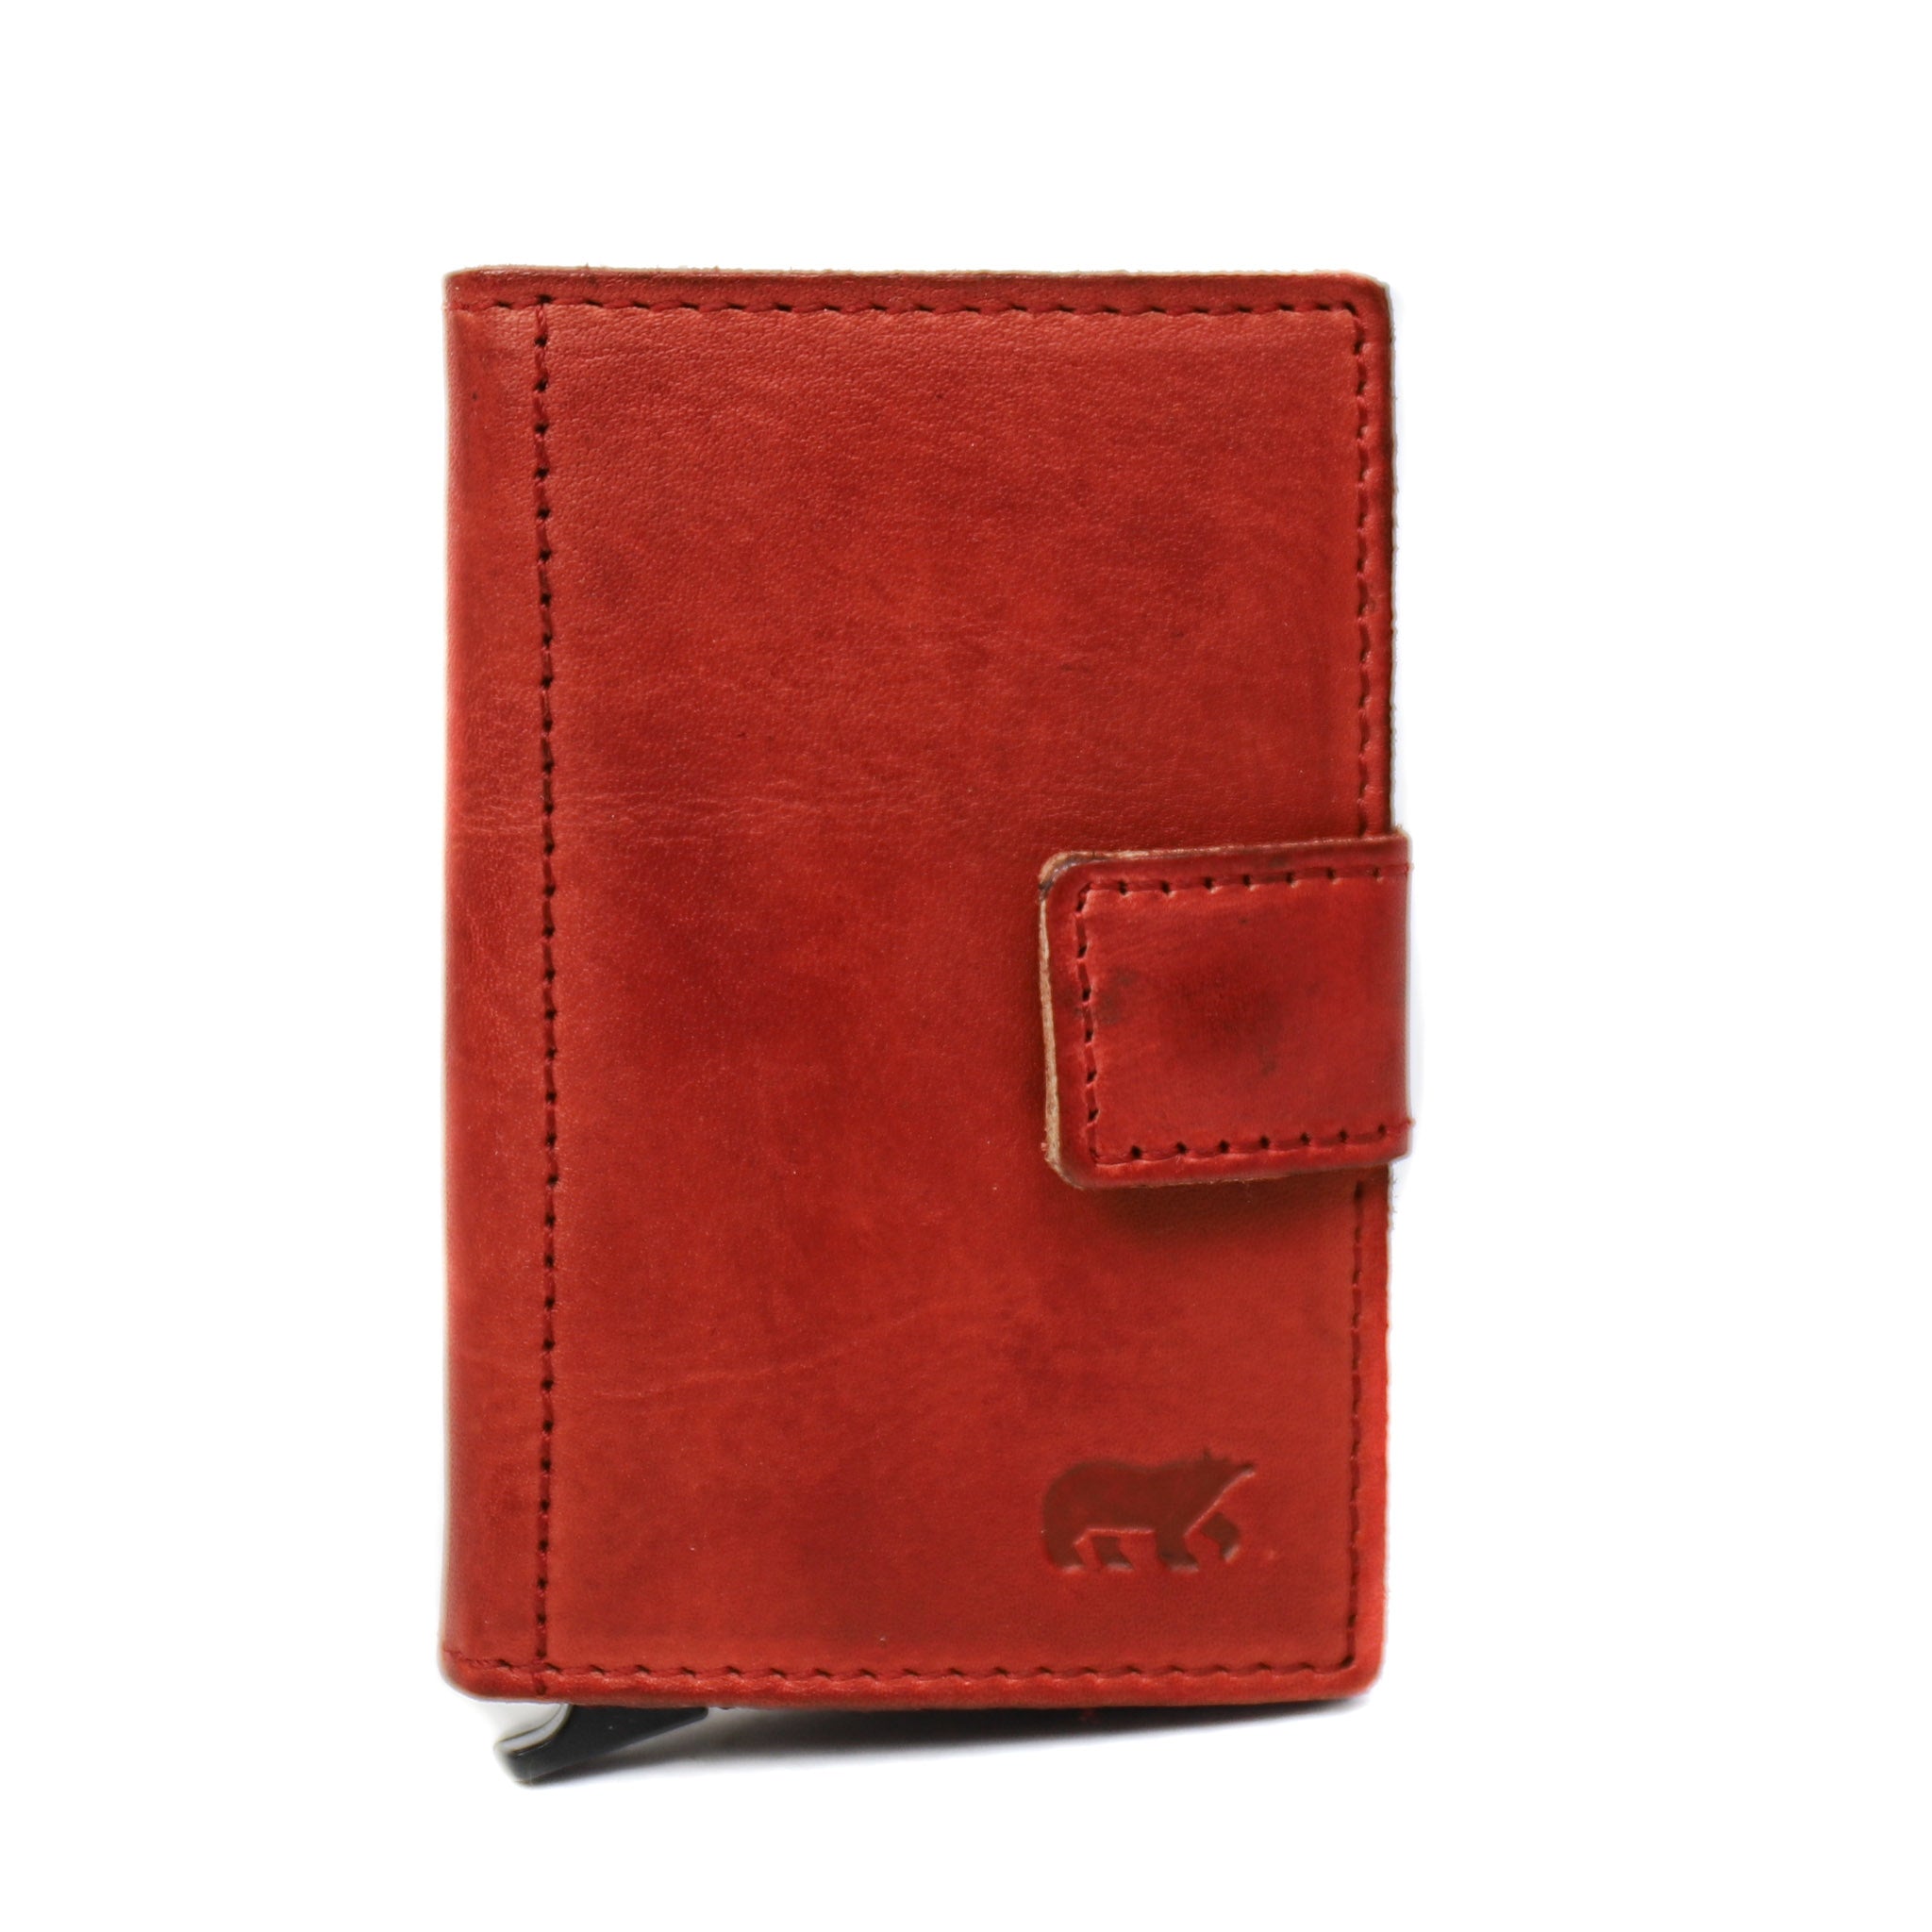 Card holder 'Pip' red - CL 15254